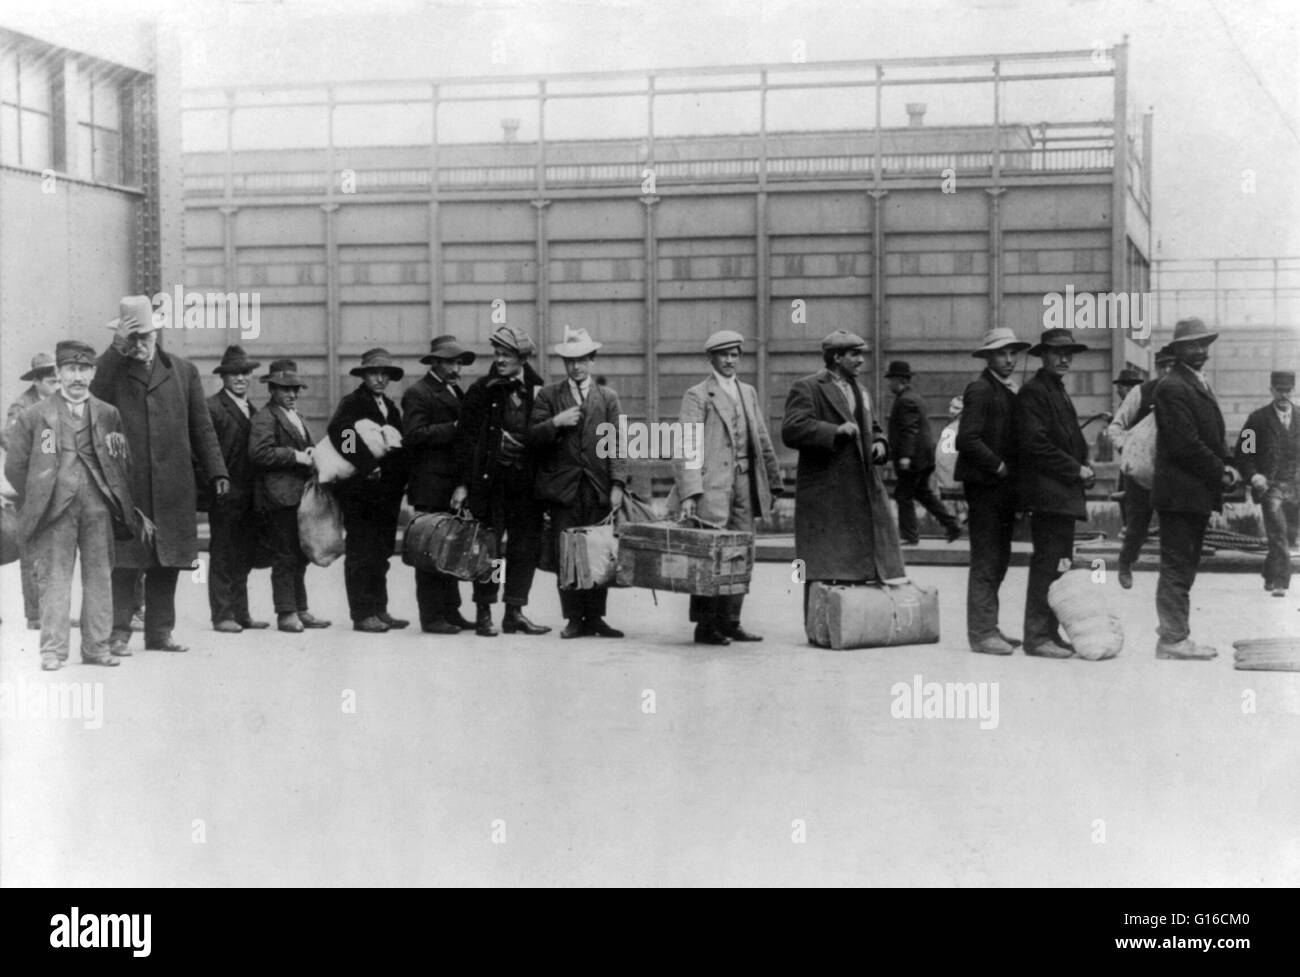 Entitled: 'immigrants from 'Princess Irene'. In the 35 years before Ellis Island opened, over eight million immigrants arriving in New York had been processed by New York State officials at Castle Garden Immigration Depot in lower Manhattan, just across t Stock Photo